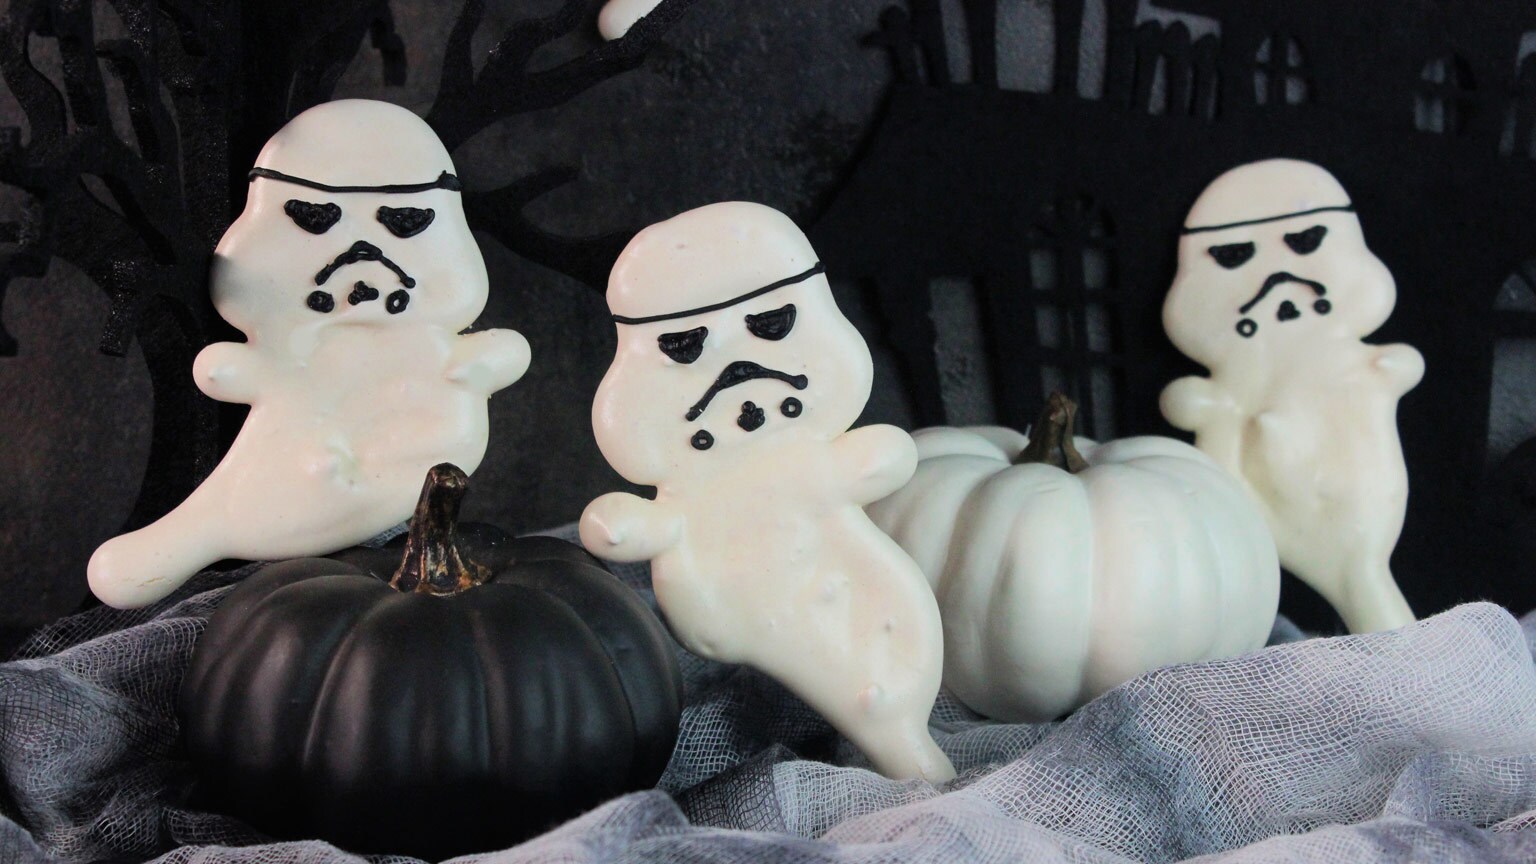 These Stormtrooper Ghost Cookies Are Frightfully Good